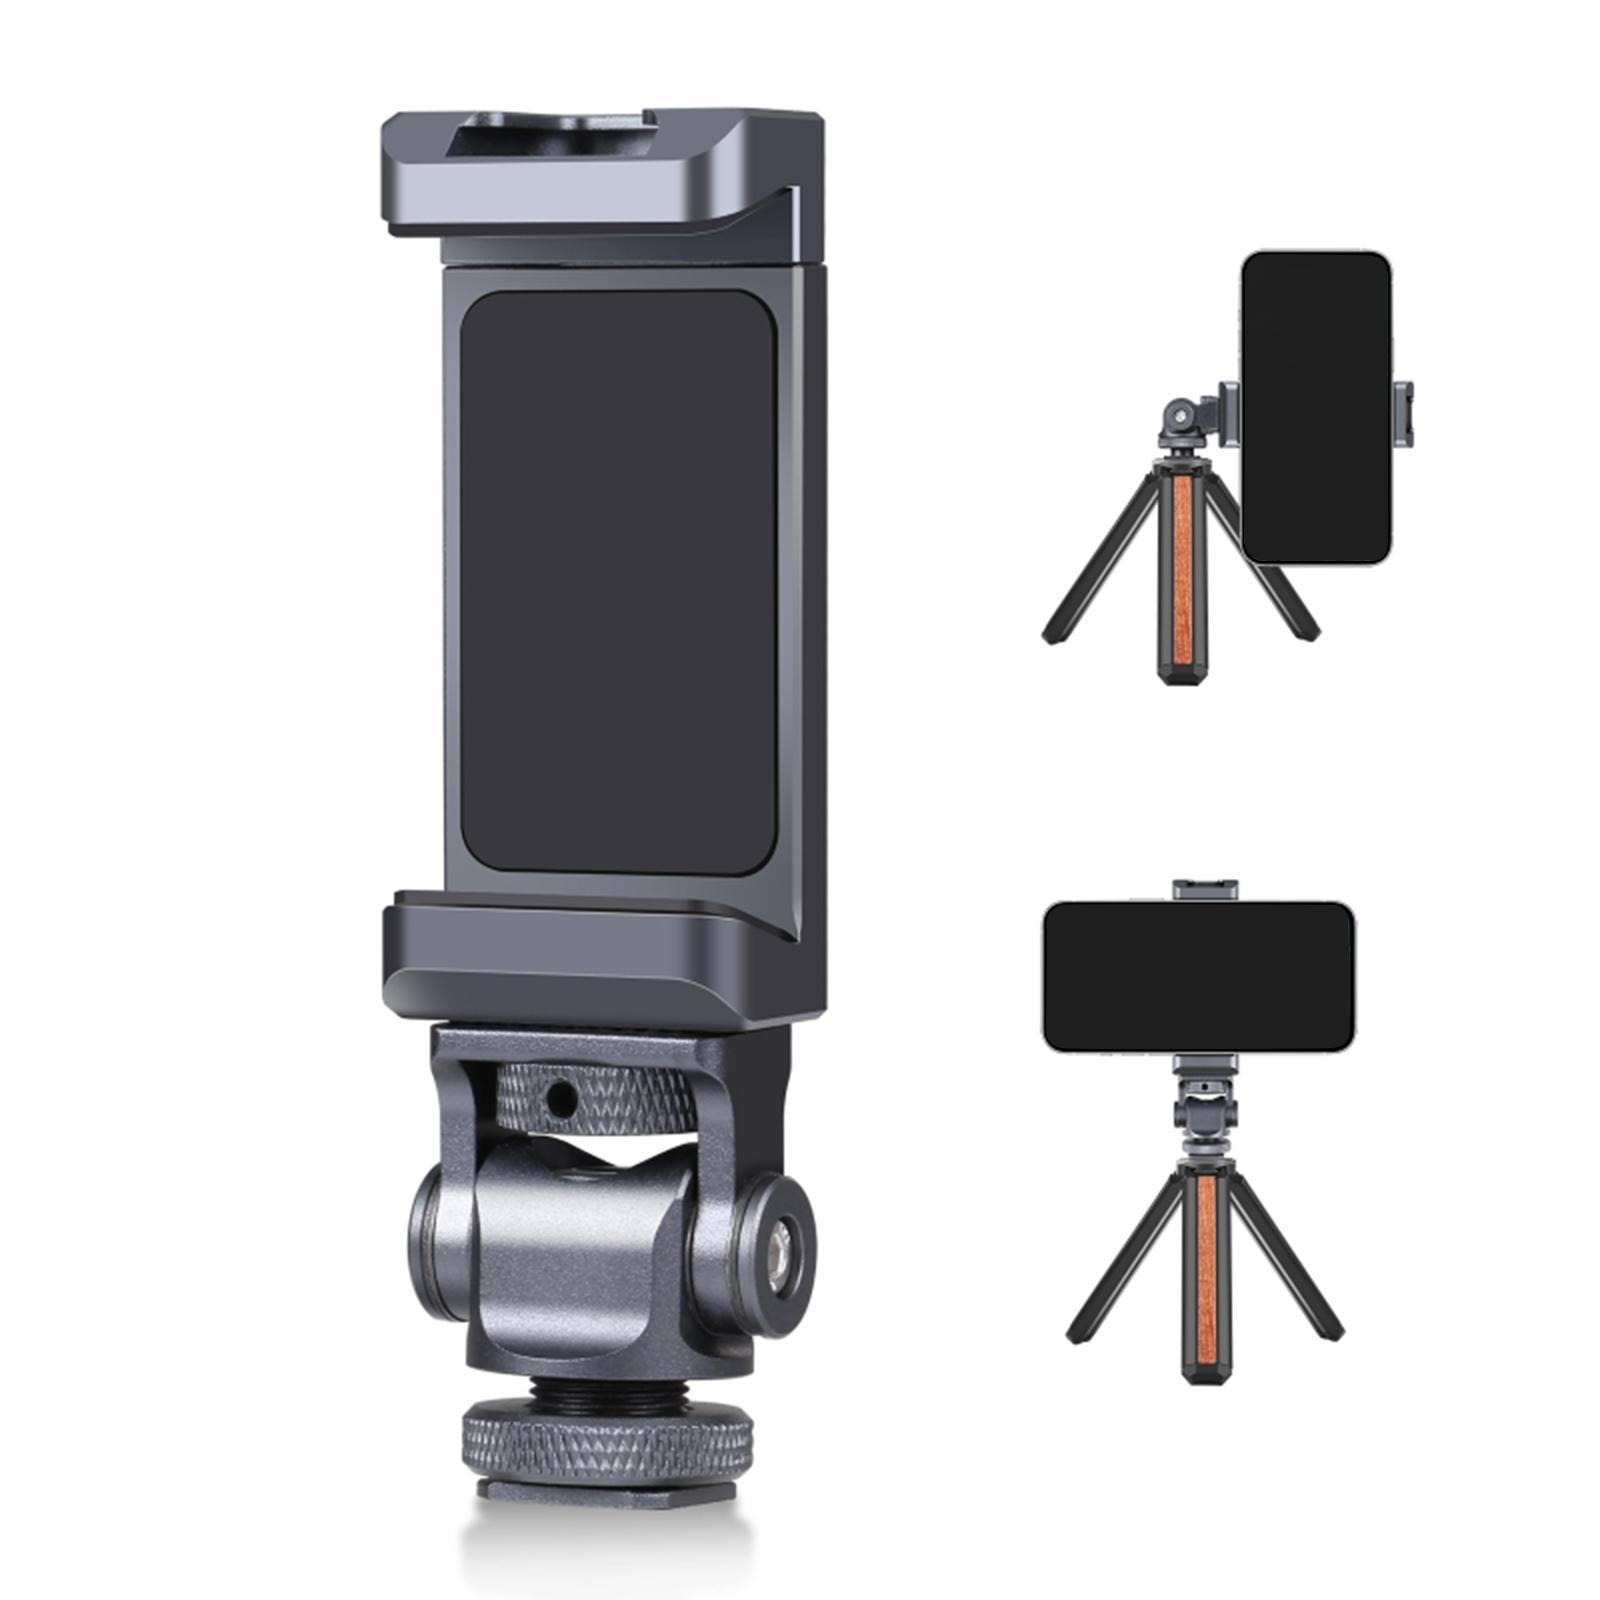 Phone Tripod Mount Holder Portable Universal for Smartphone Photography